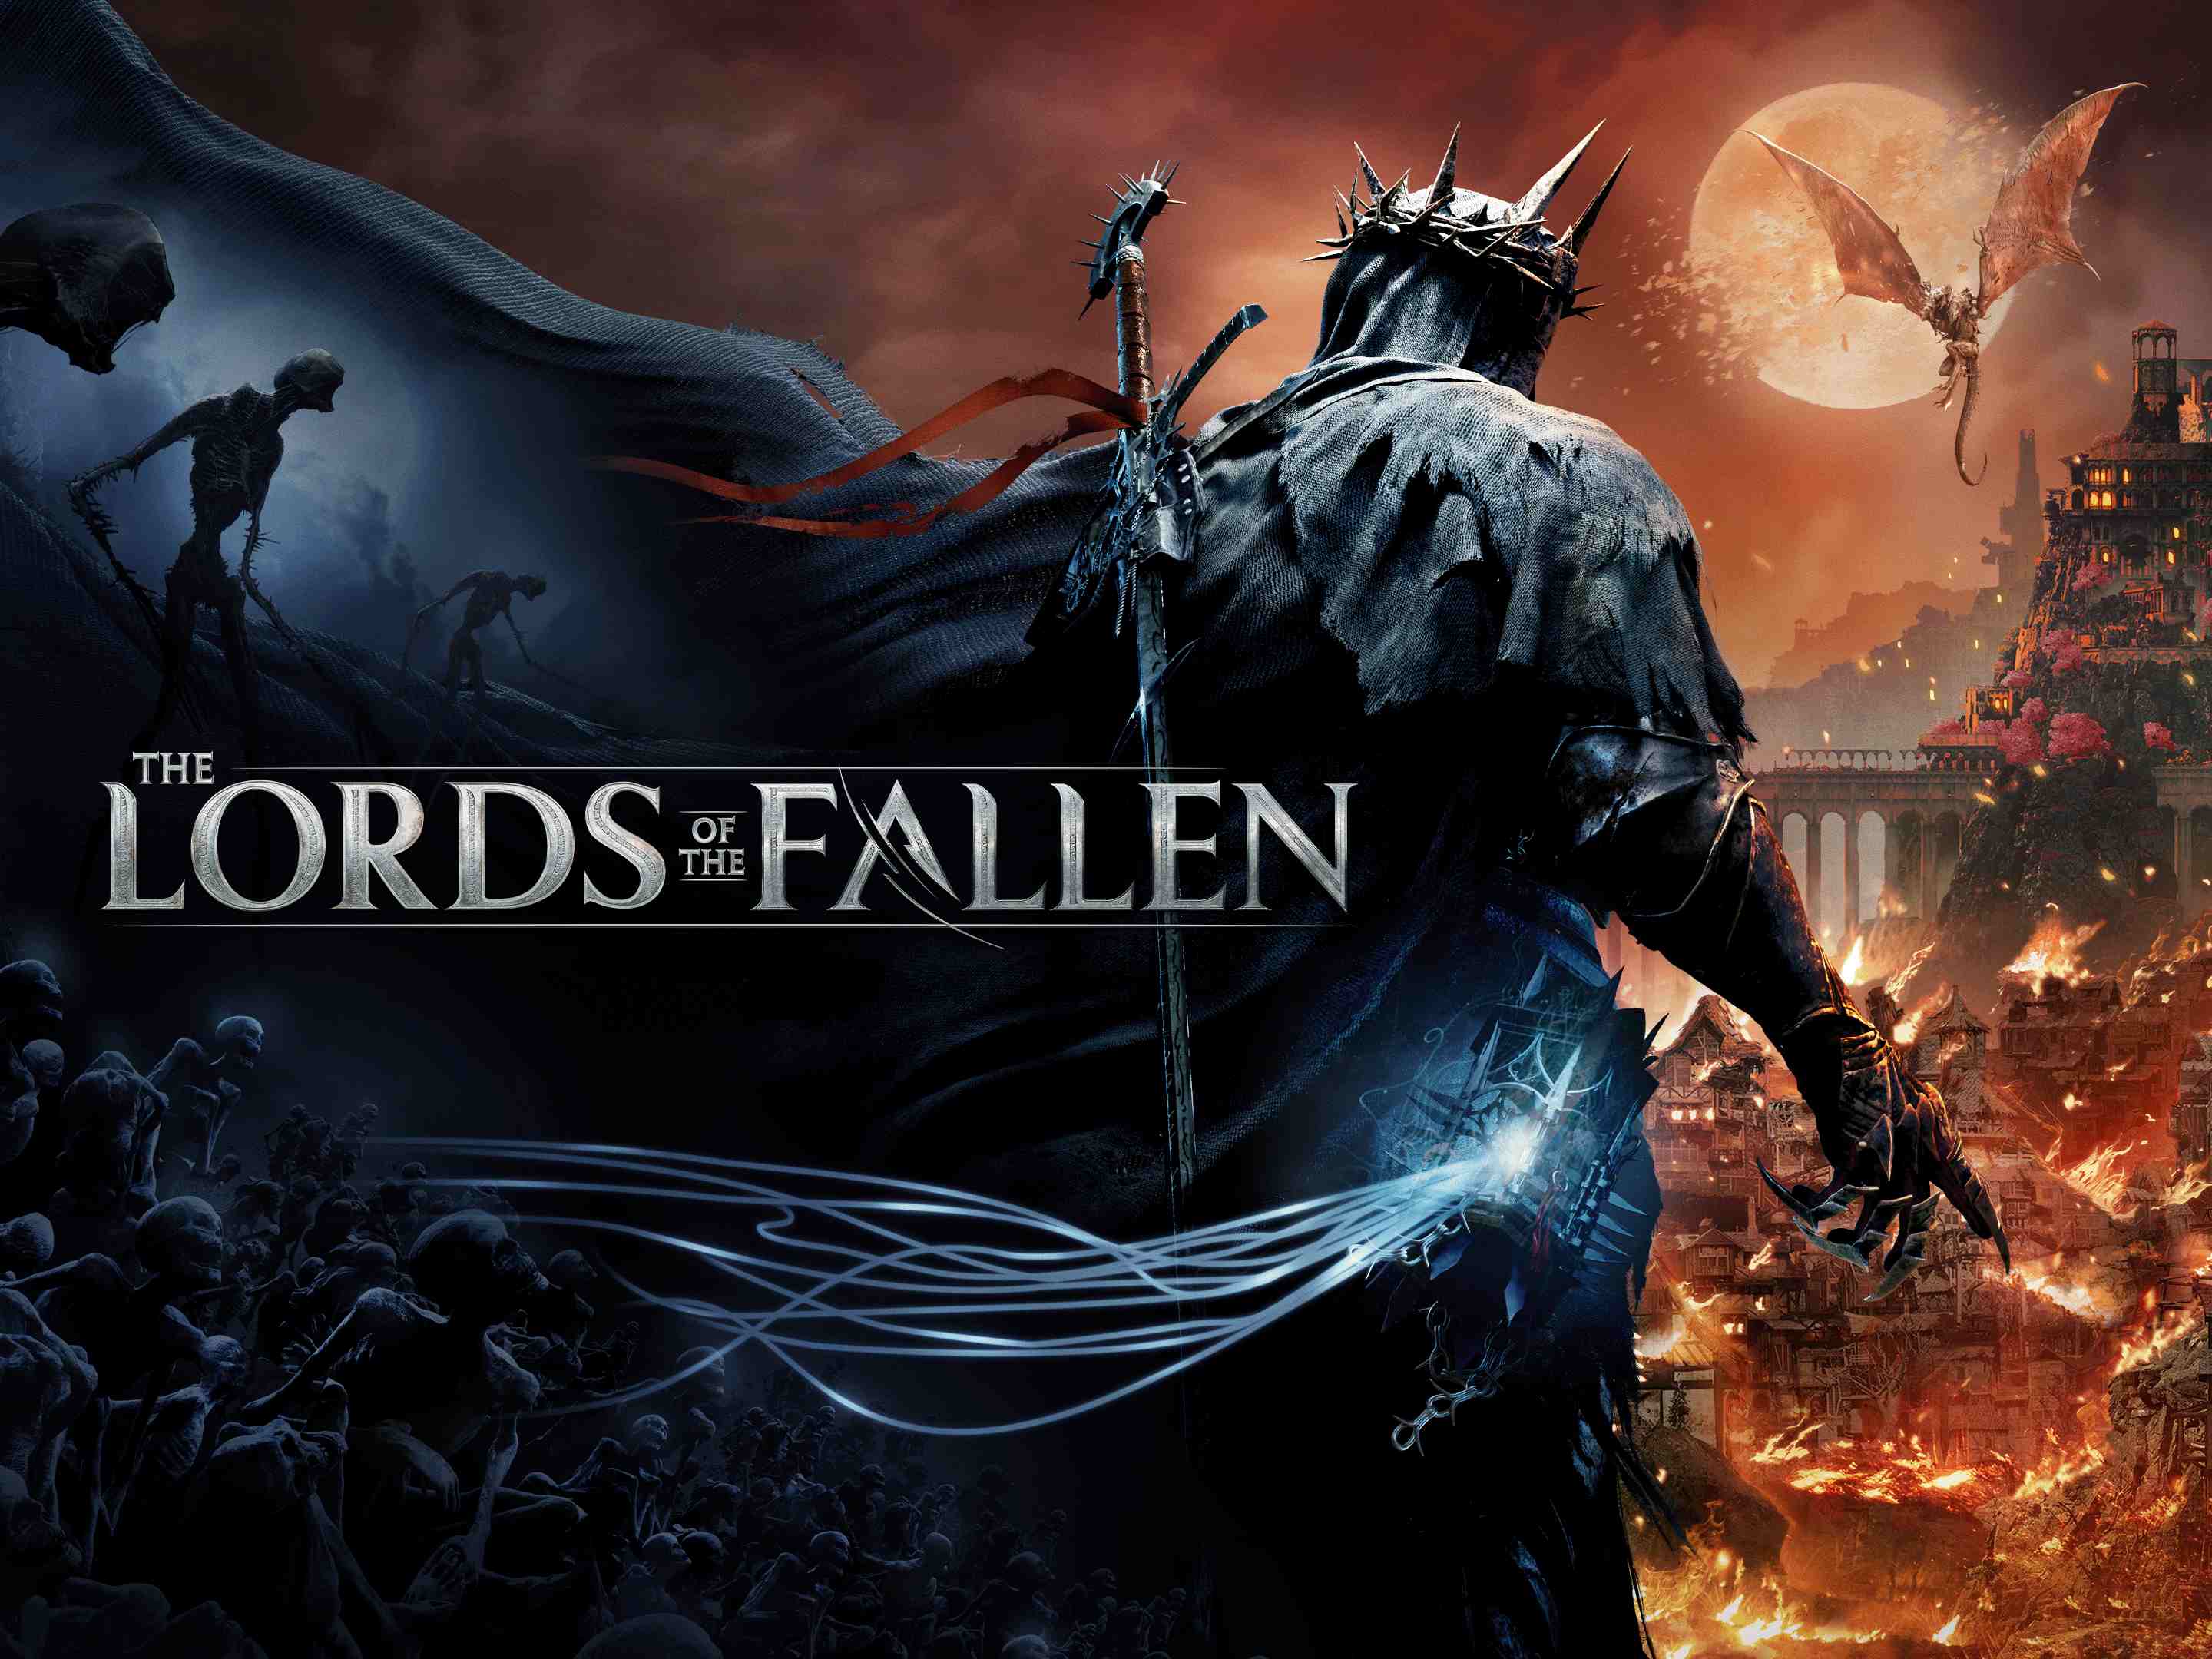 Lords of the Fallen Concept Art Wallpapers on WallpaperDog